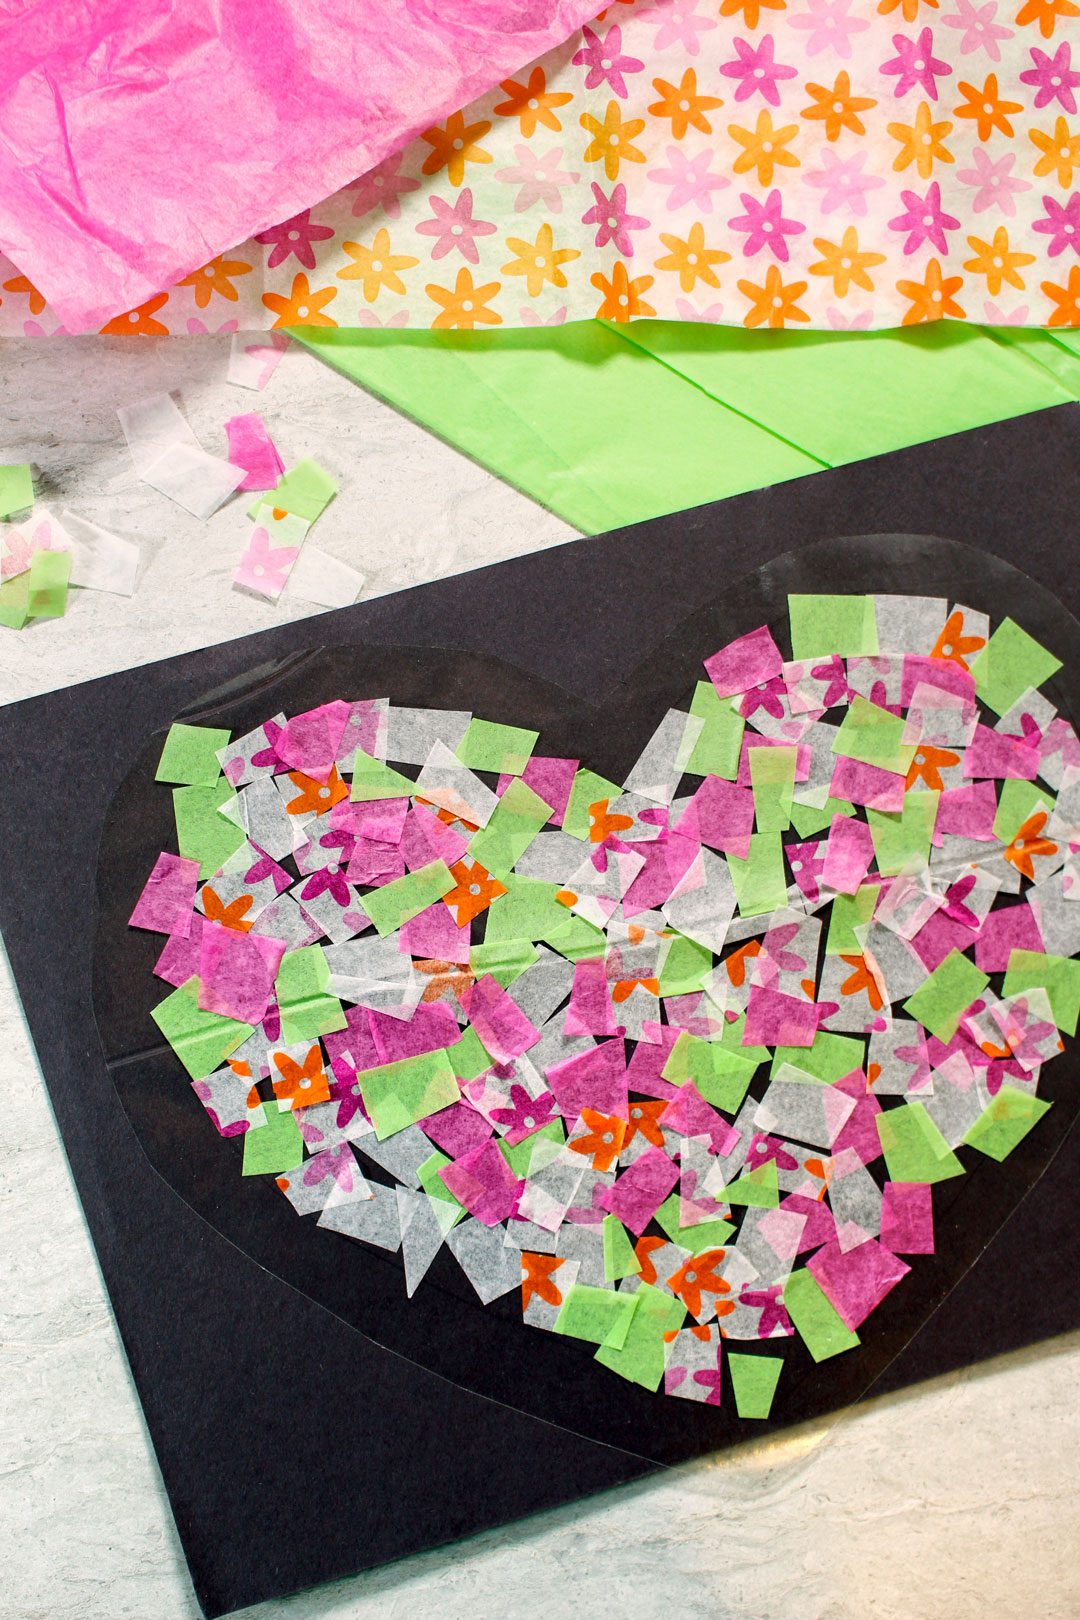 Lucky Heart, Paper Heart, Free DIY Origami